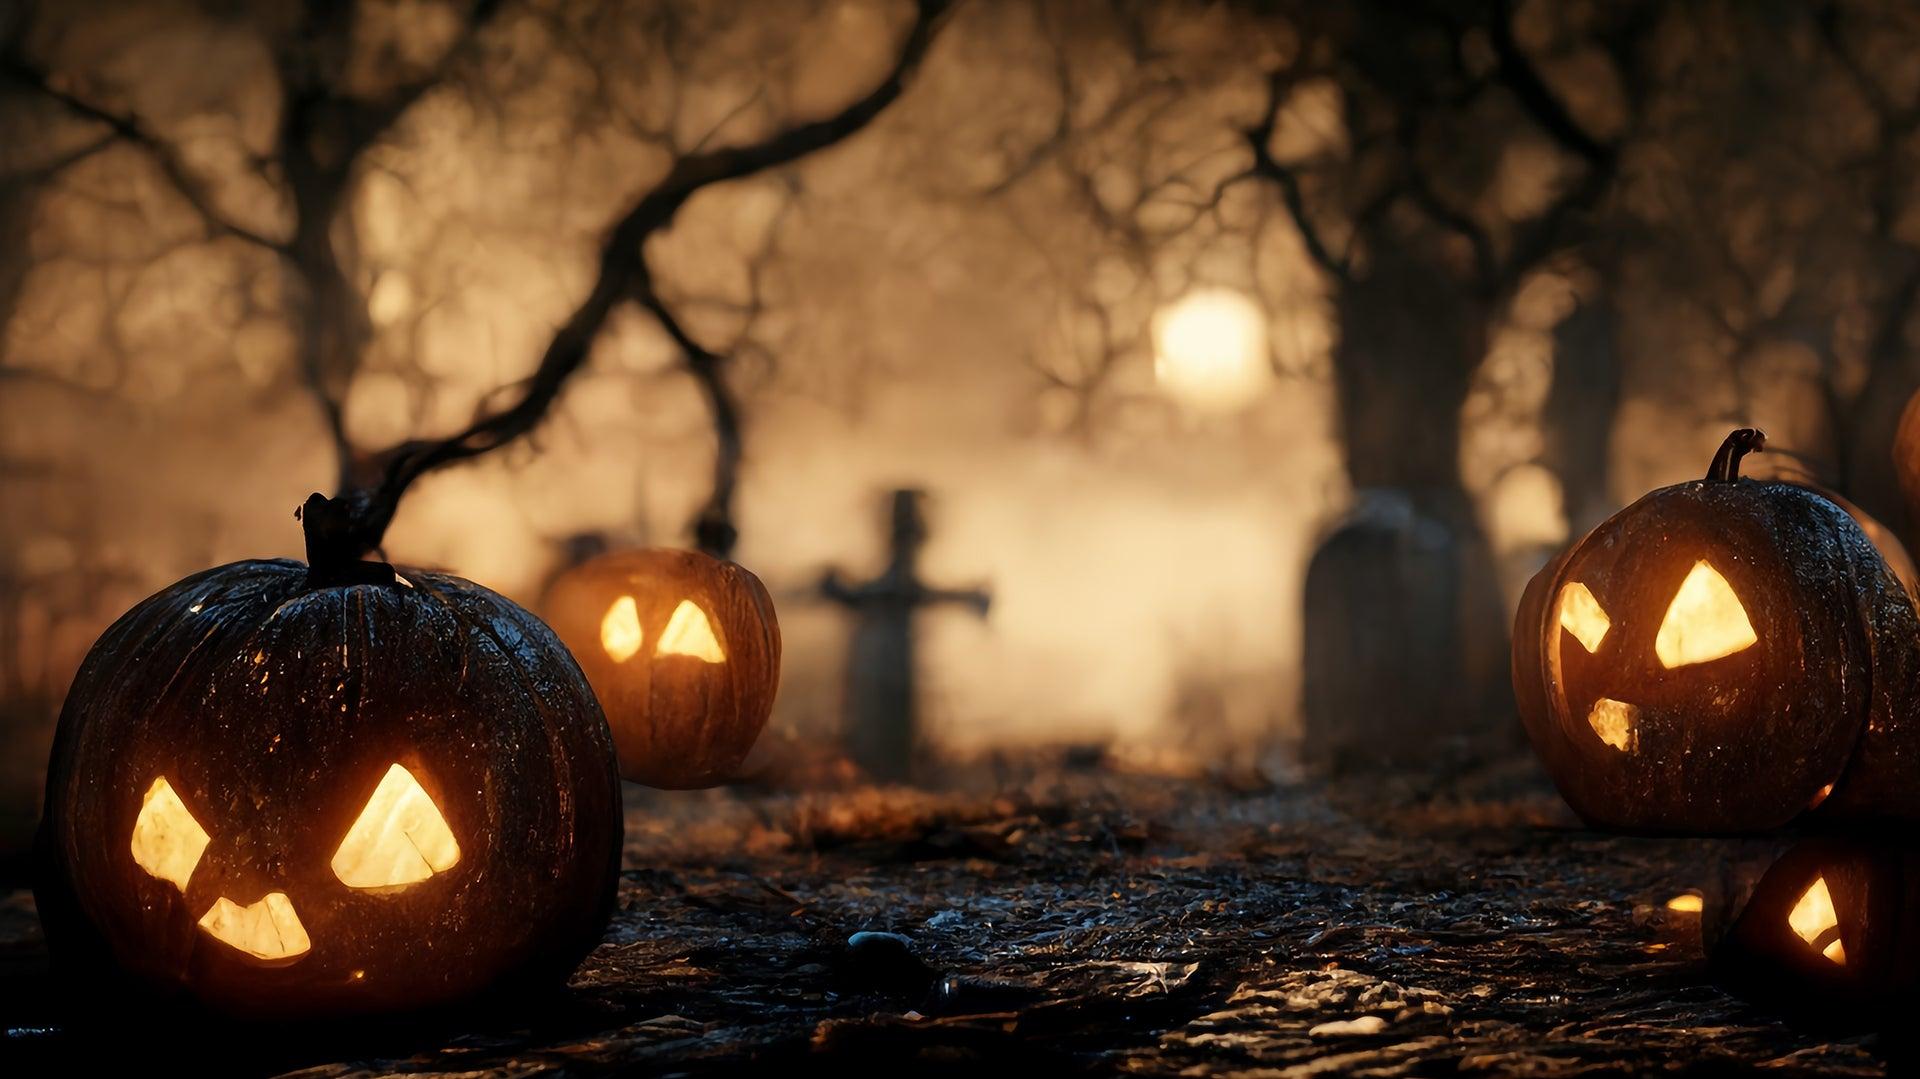 free-download-halloween-origins-meaning-traditions-history-1920x1080